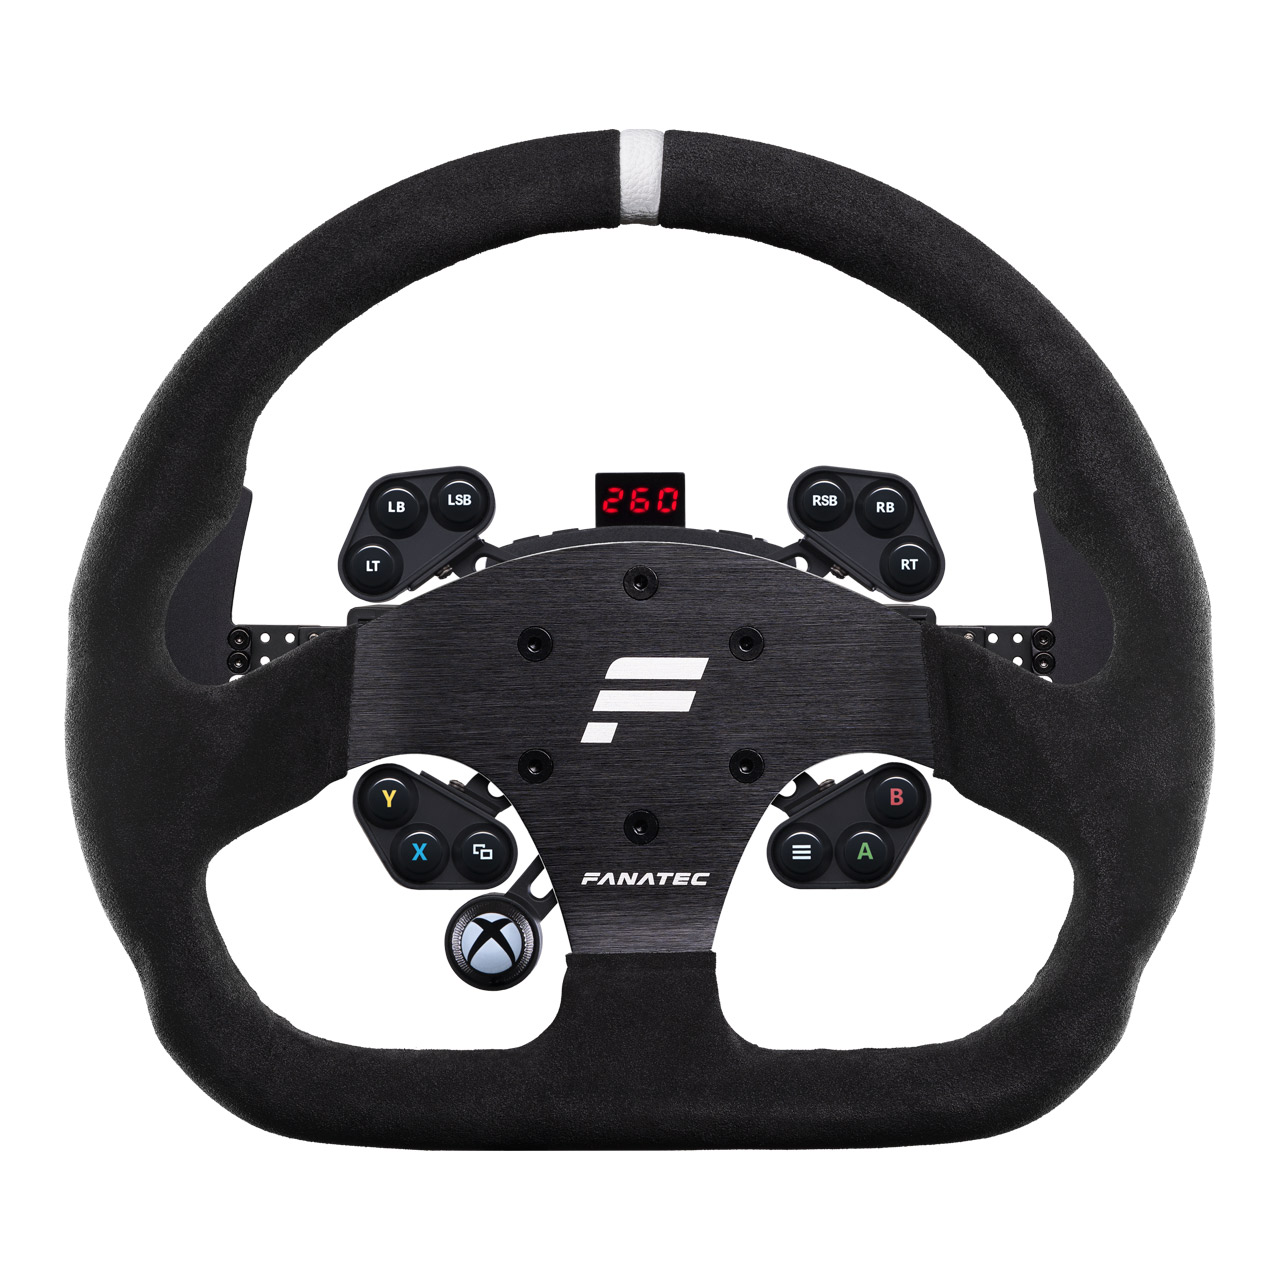 ClubSport Steering Wheel GT V2 for Xbox